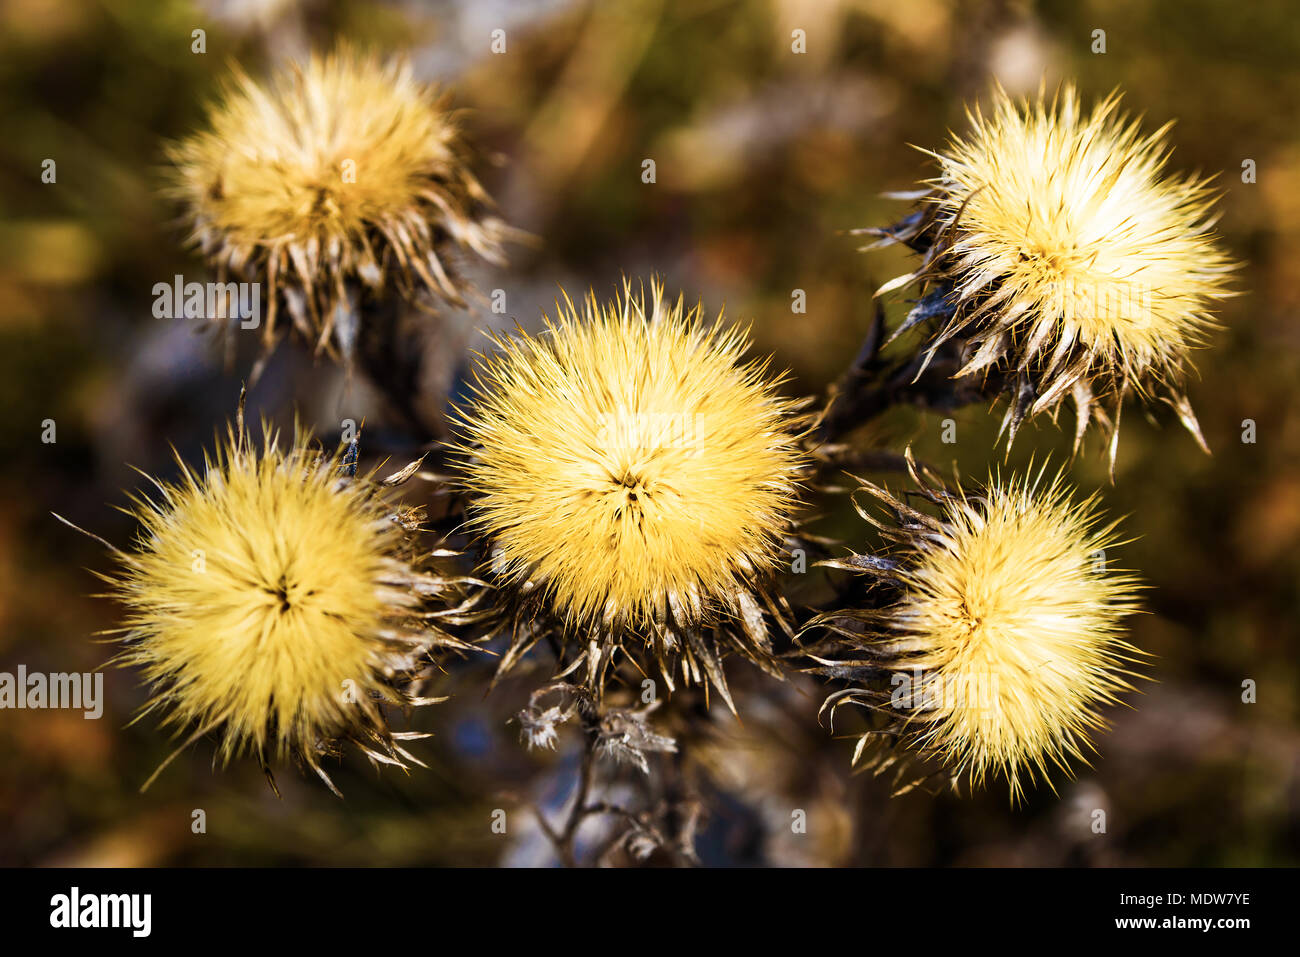 Five dry and yellow seed pods on an unknown plant in spring. Stock Photo